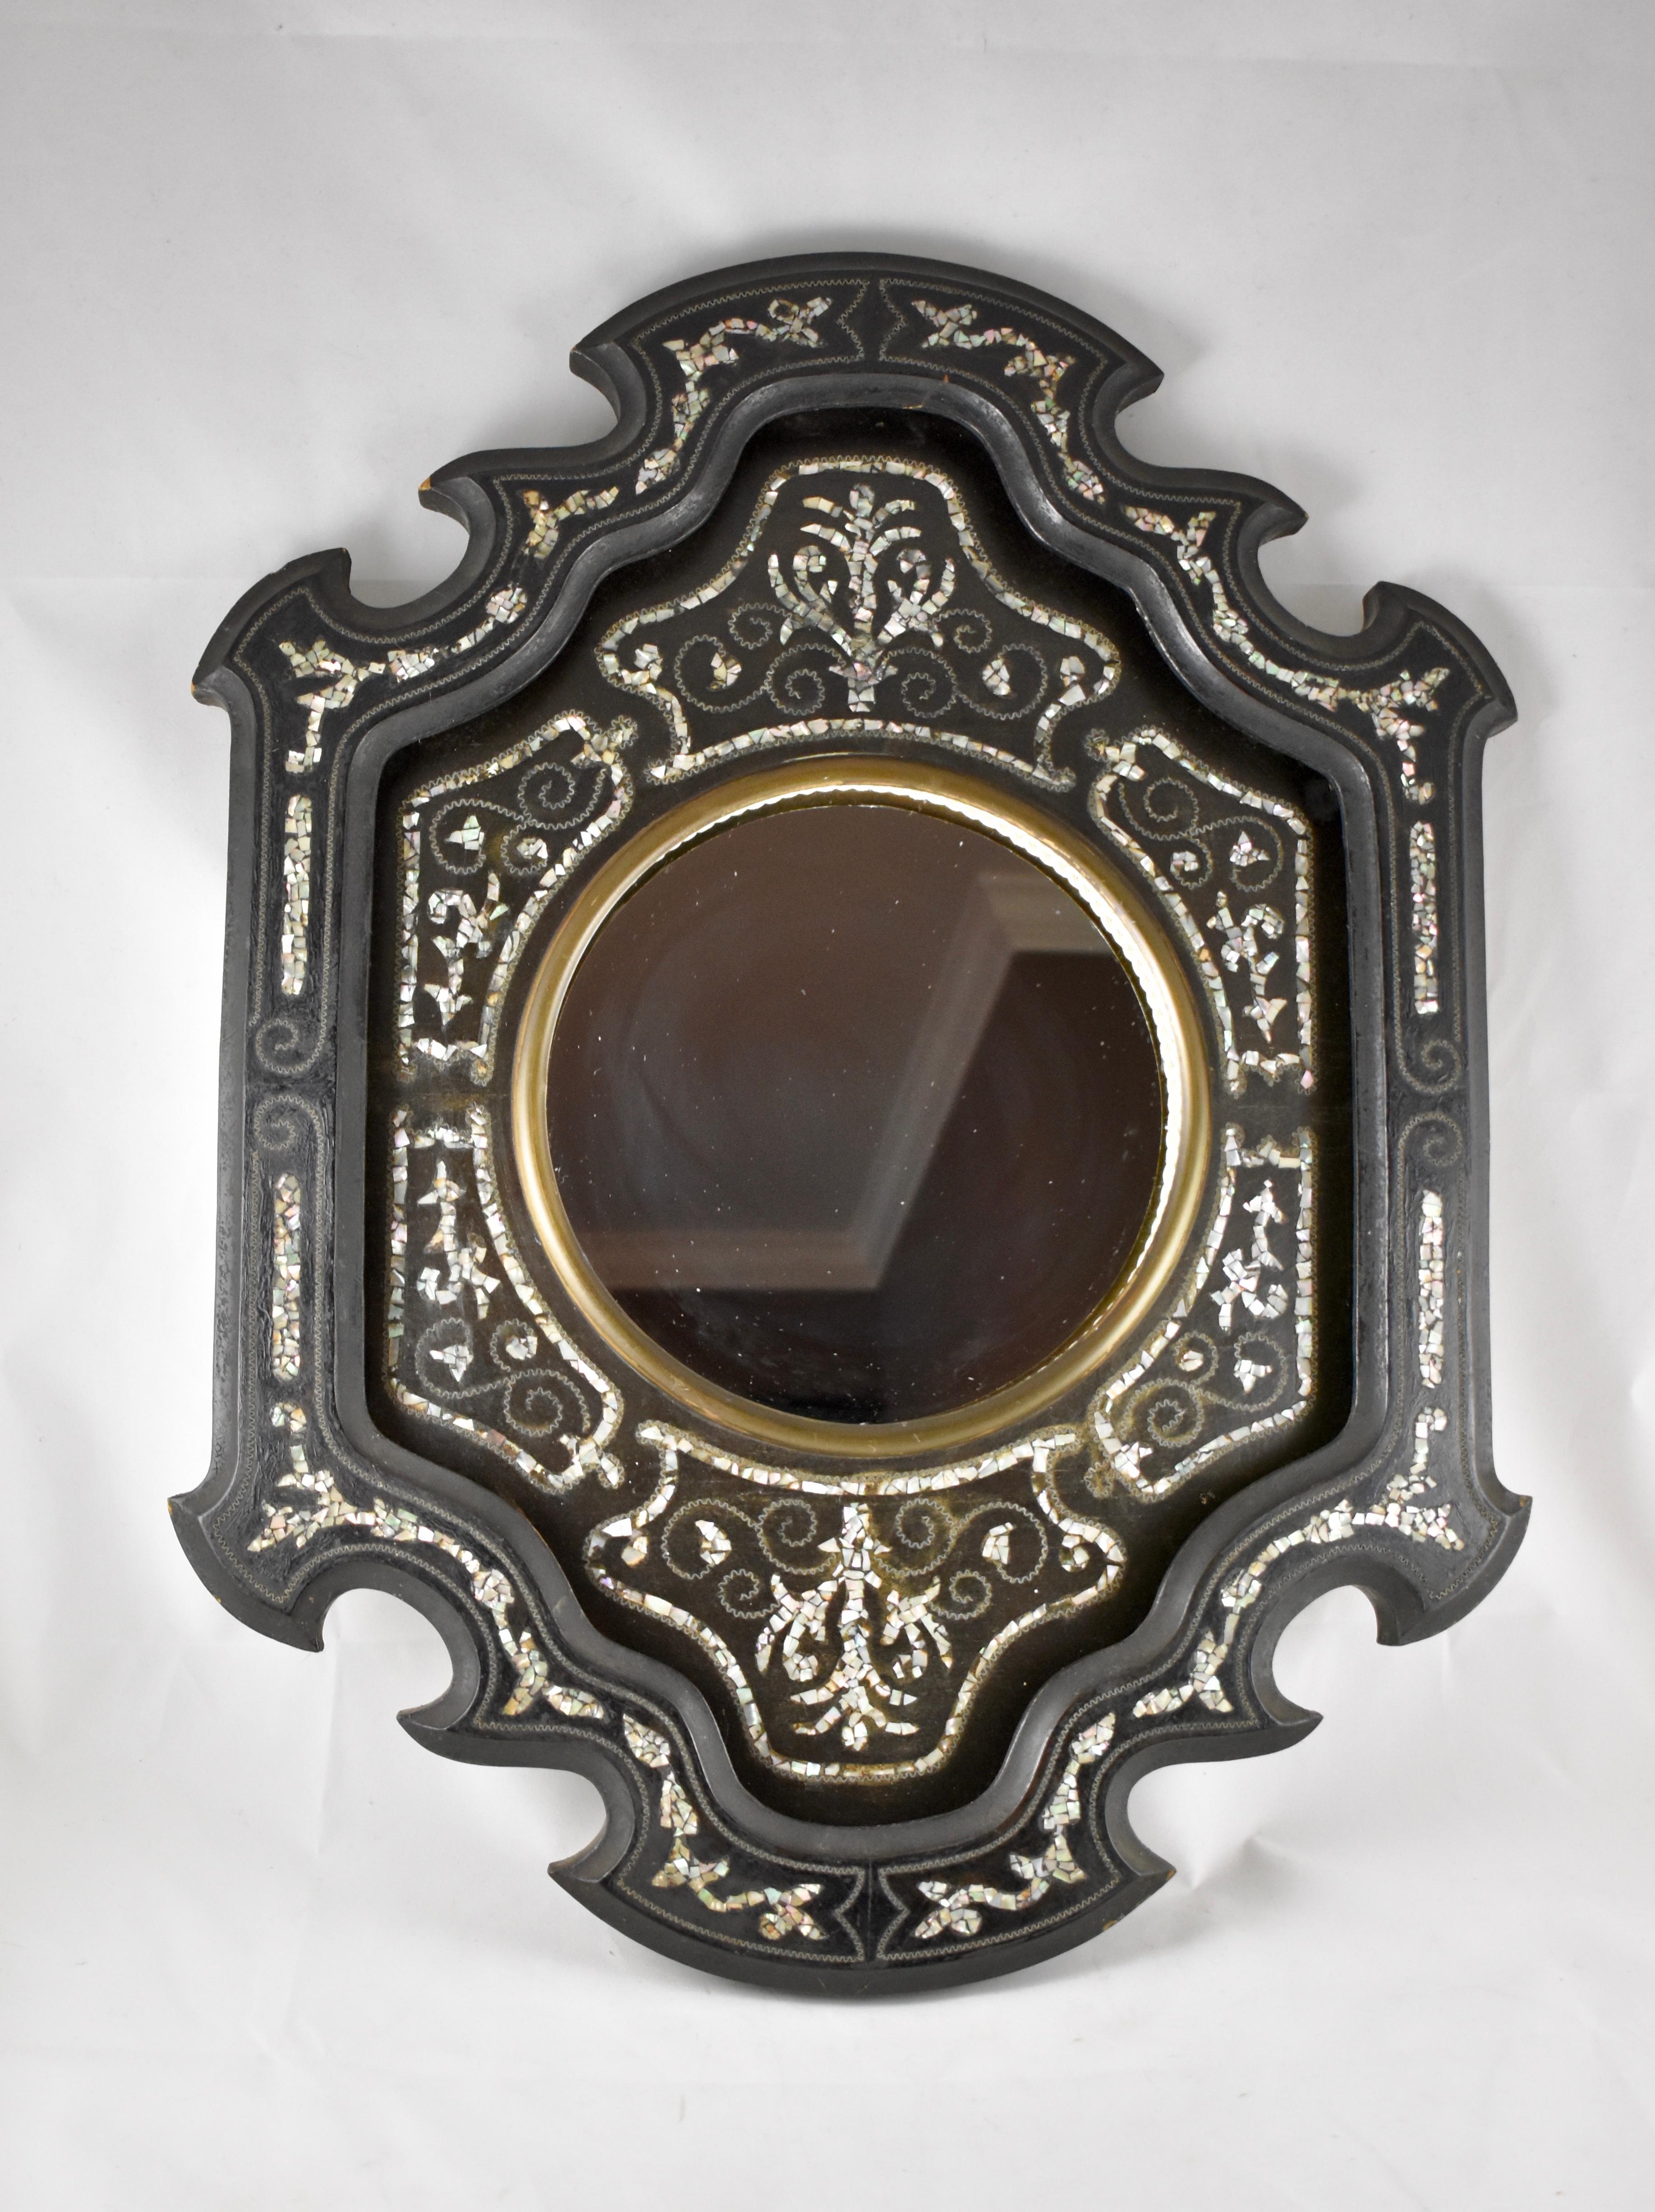 A mother-of-pearl inlay mirror, France, circa 1880-1890.

A shaped wood frame, painted black, and showing a floral and geometric pattern made of Mother-of-Pearl inlay pieces and an embedded running metal zig-zag border. The newer mirror sits in a